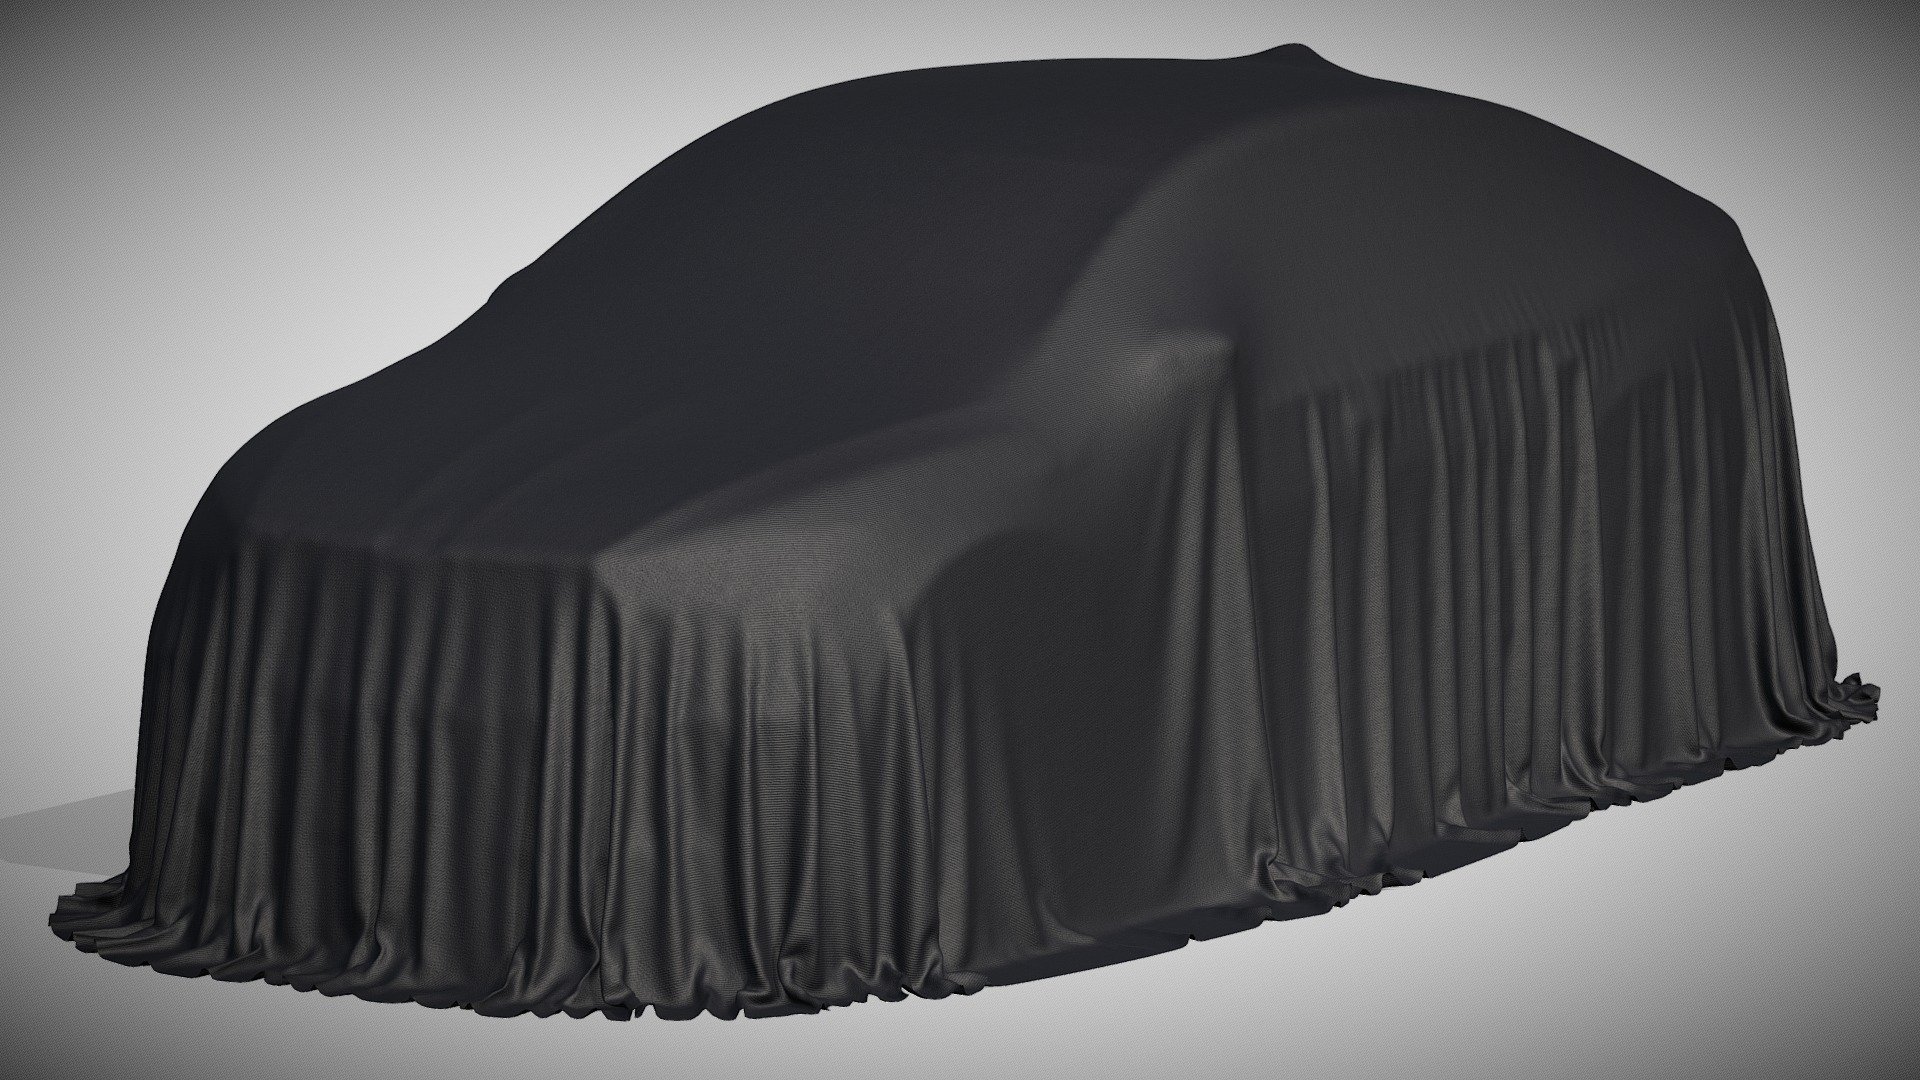 Car Cover SUV coupe

Cover car an auto show traditional hide and reveal ceremony textile cover props. Cover car a manufacturer or dealer motor show traditional fabric cover drapery. For auto show ceremonies, car show ceremonies, manufacturing of the vehicles, unusual future cars, transportation of the future, modern vehicles, modern vehicles engineering, concepts or comfortable vehicles, car machinery, new car presentations, contemporary vehicles, and future auto transportation engineering documentary or educational projects.

Clean geometry Light weight model, yet completely detailed for HI-Res renders. Use for movies, Advertisements or games

Corona render and materials

All textures include in *.rar files

Lighting setup is not included in the file! - Car Cover SUV coupe - Buy Royalty Free 3D model by zifir3d 3d model